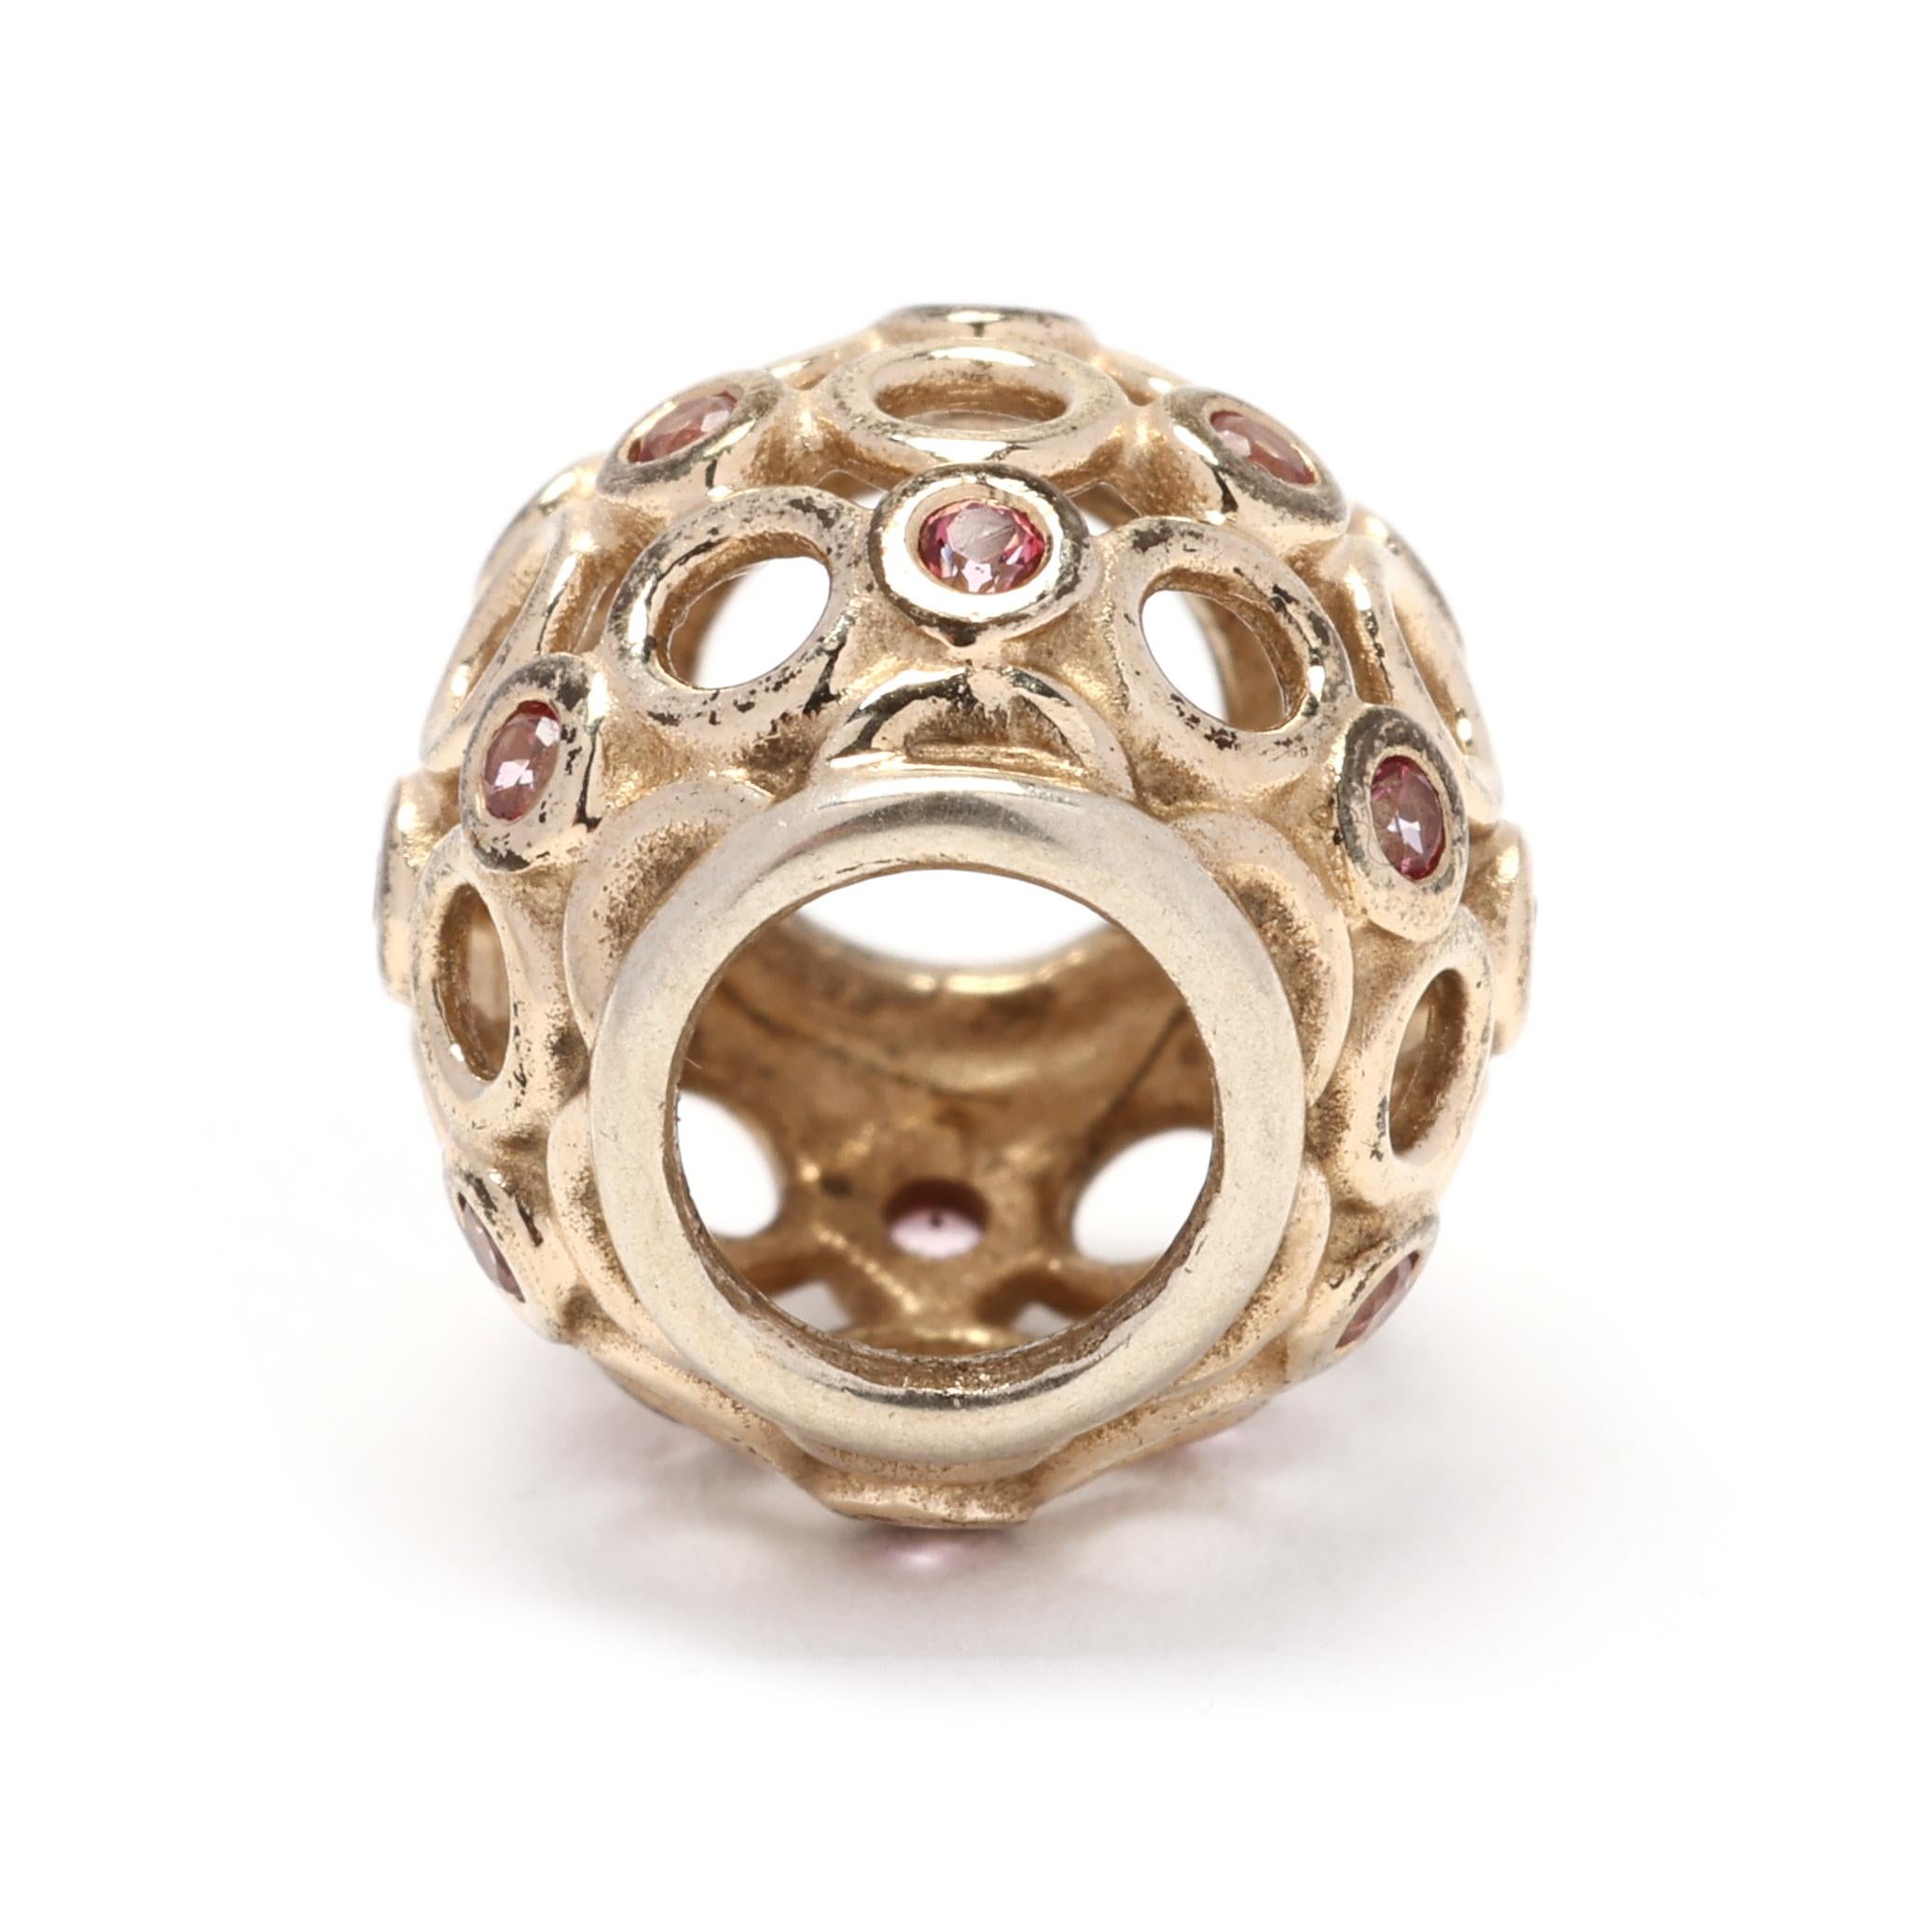 This charm is compatible with all Pandora bracelets and can be combined with other charms to create a unique and personalized design. It is made with high-quality materials and craftsmanship, ensuring its durability and longevity. This Pandora Red